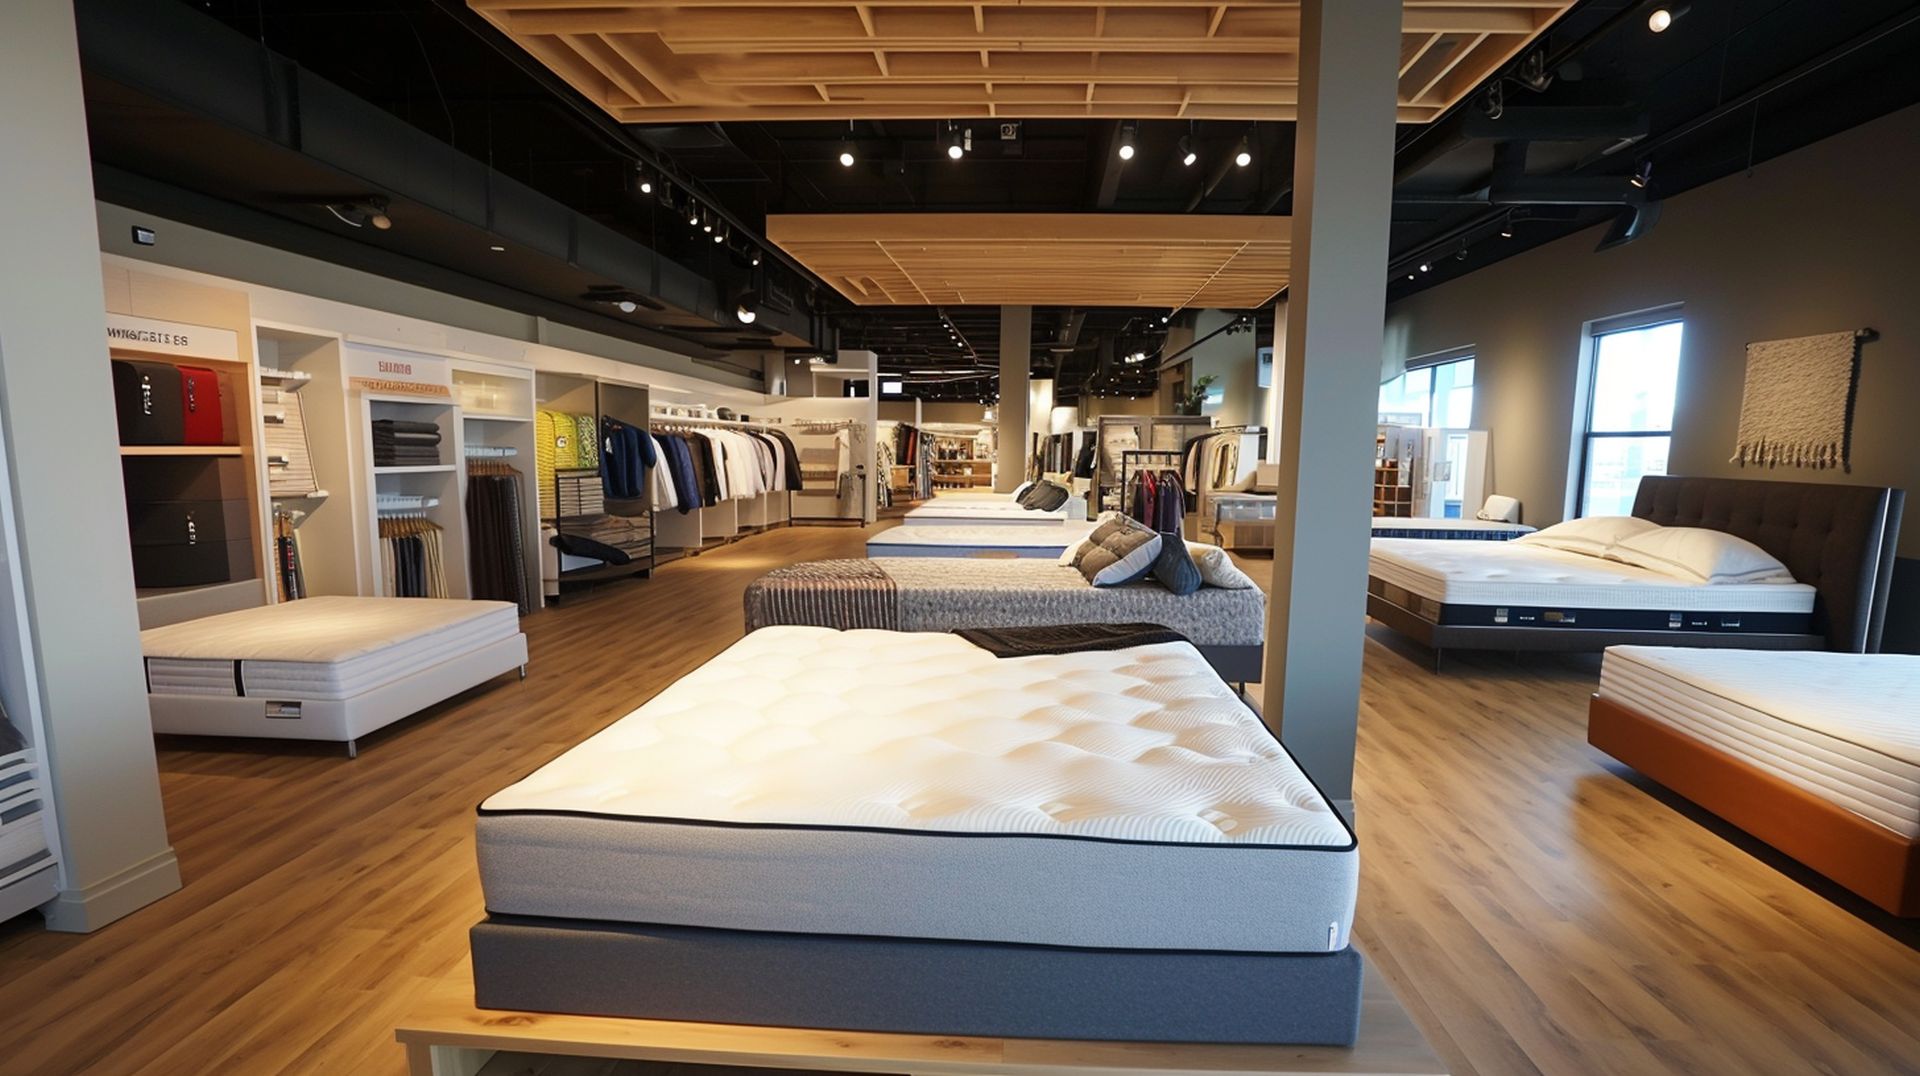 If you're looking for a new bed, mattress stores in Midland offer the best customer and delivery service, financing, and warranties in Texas